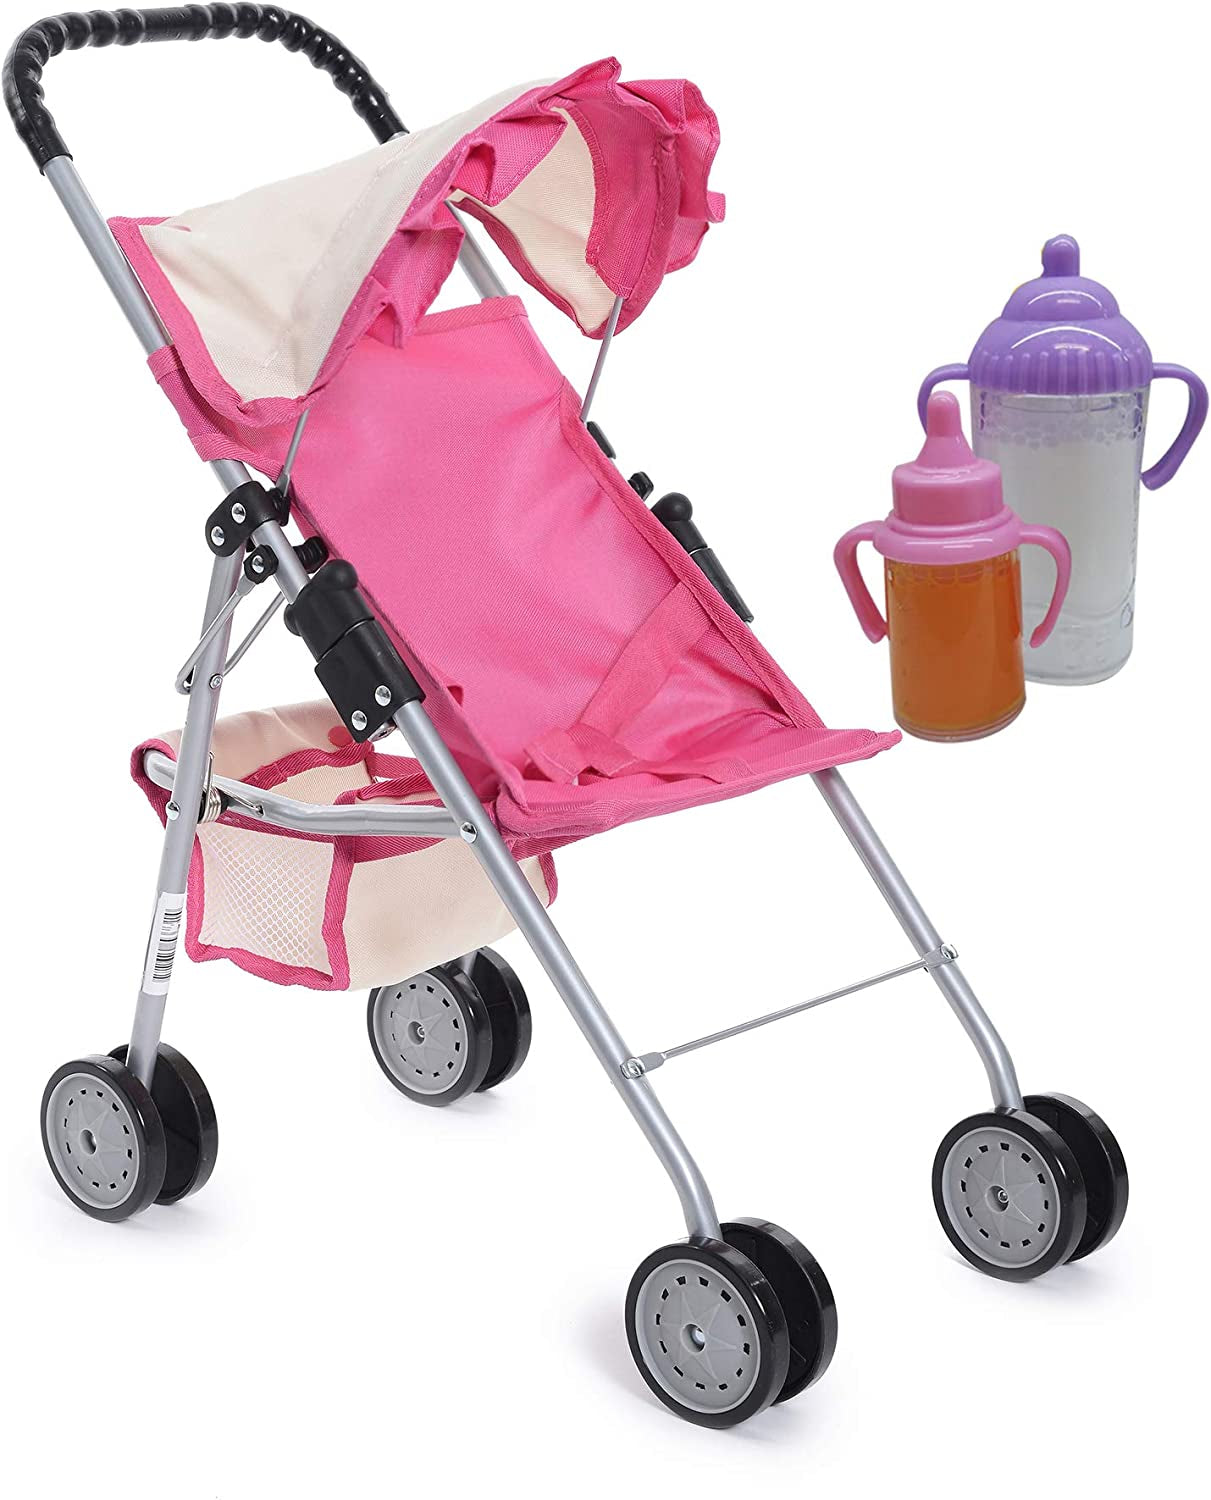 My First Doll Stroller with Basket - Pink Off-White Foldable Doll Stroller - Fits Upto 18" Dolls, 2 Free Magic Bottles Included